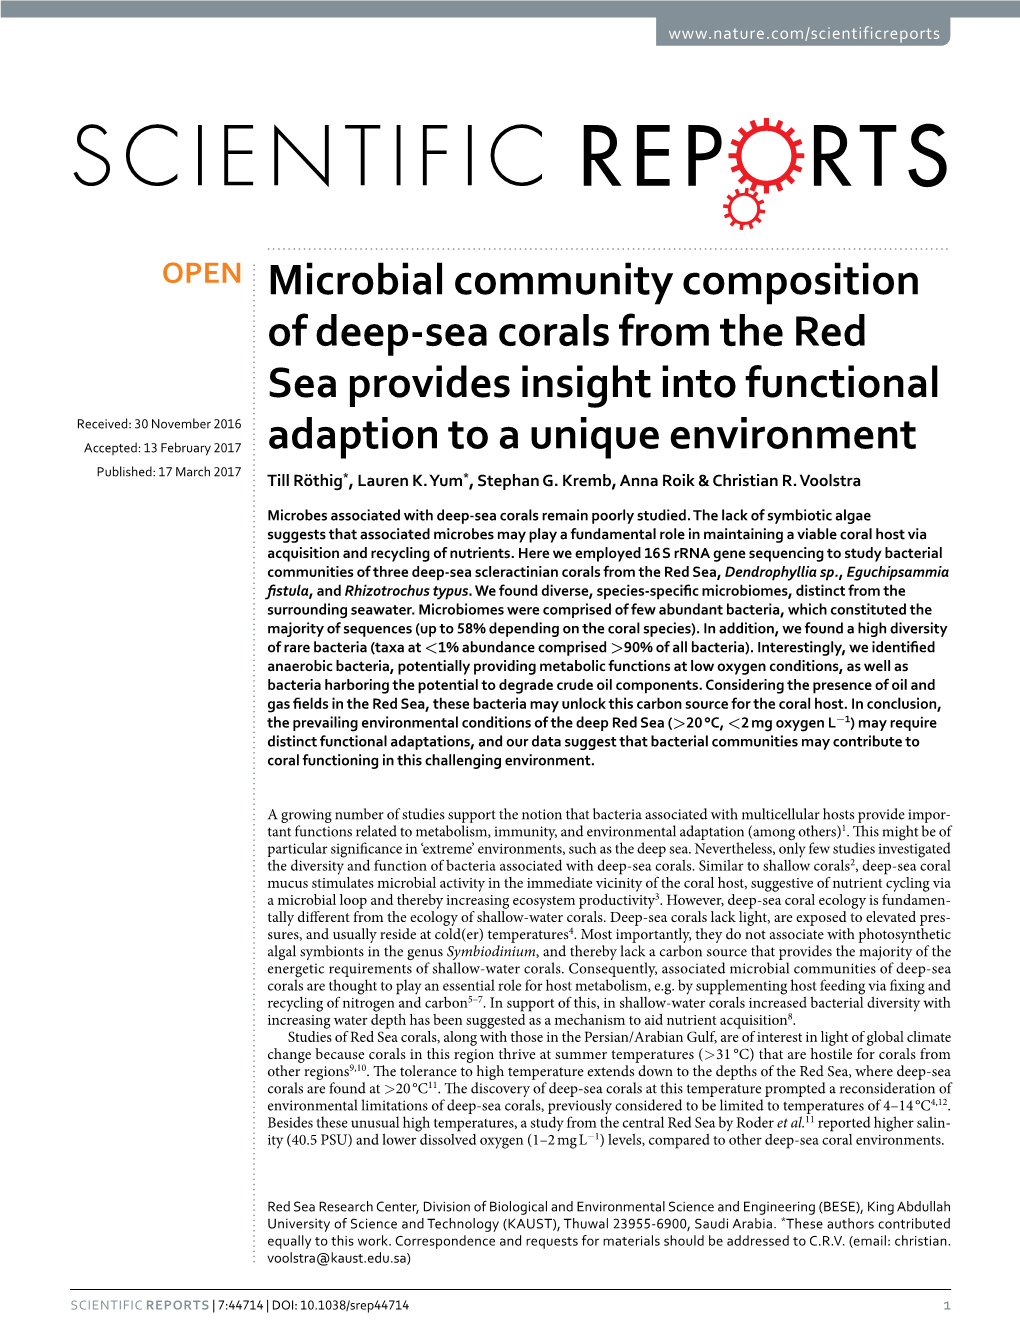 Microbial Community Composition of Deep-Sea Corals from the Red Sea